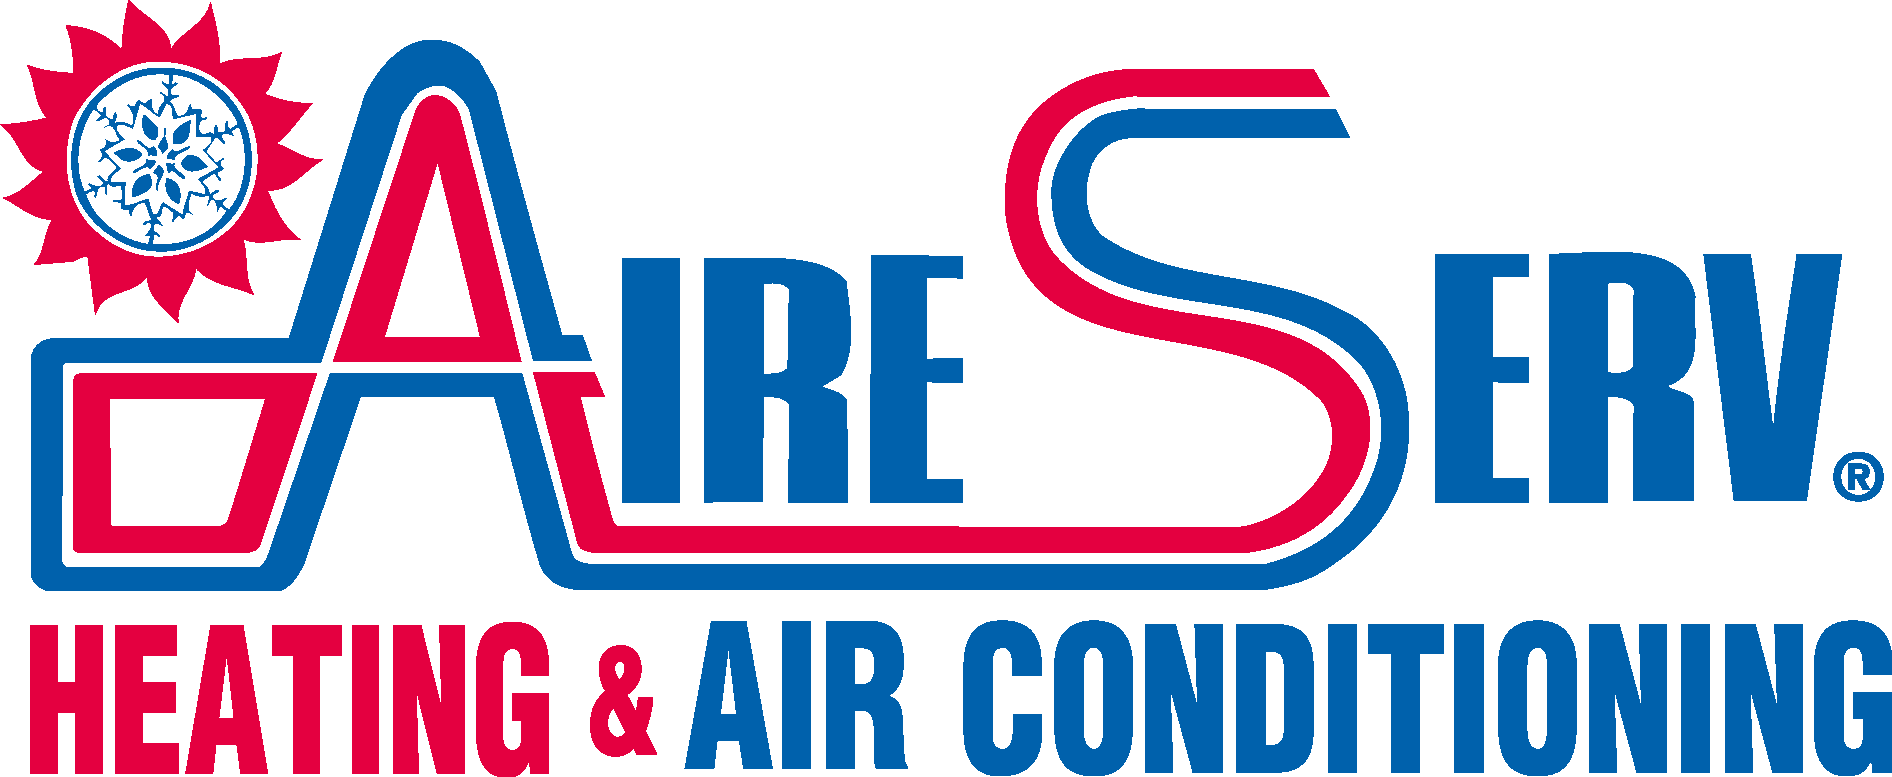 AireServ Heating and Air Conditioning Logo Vector